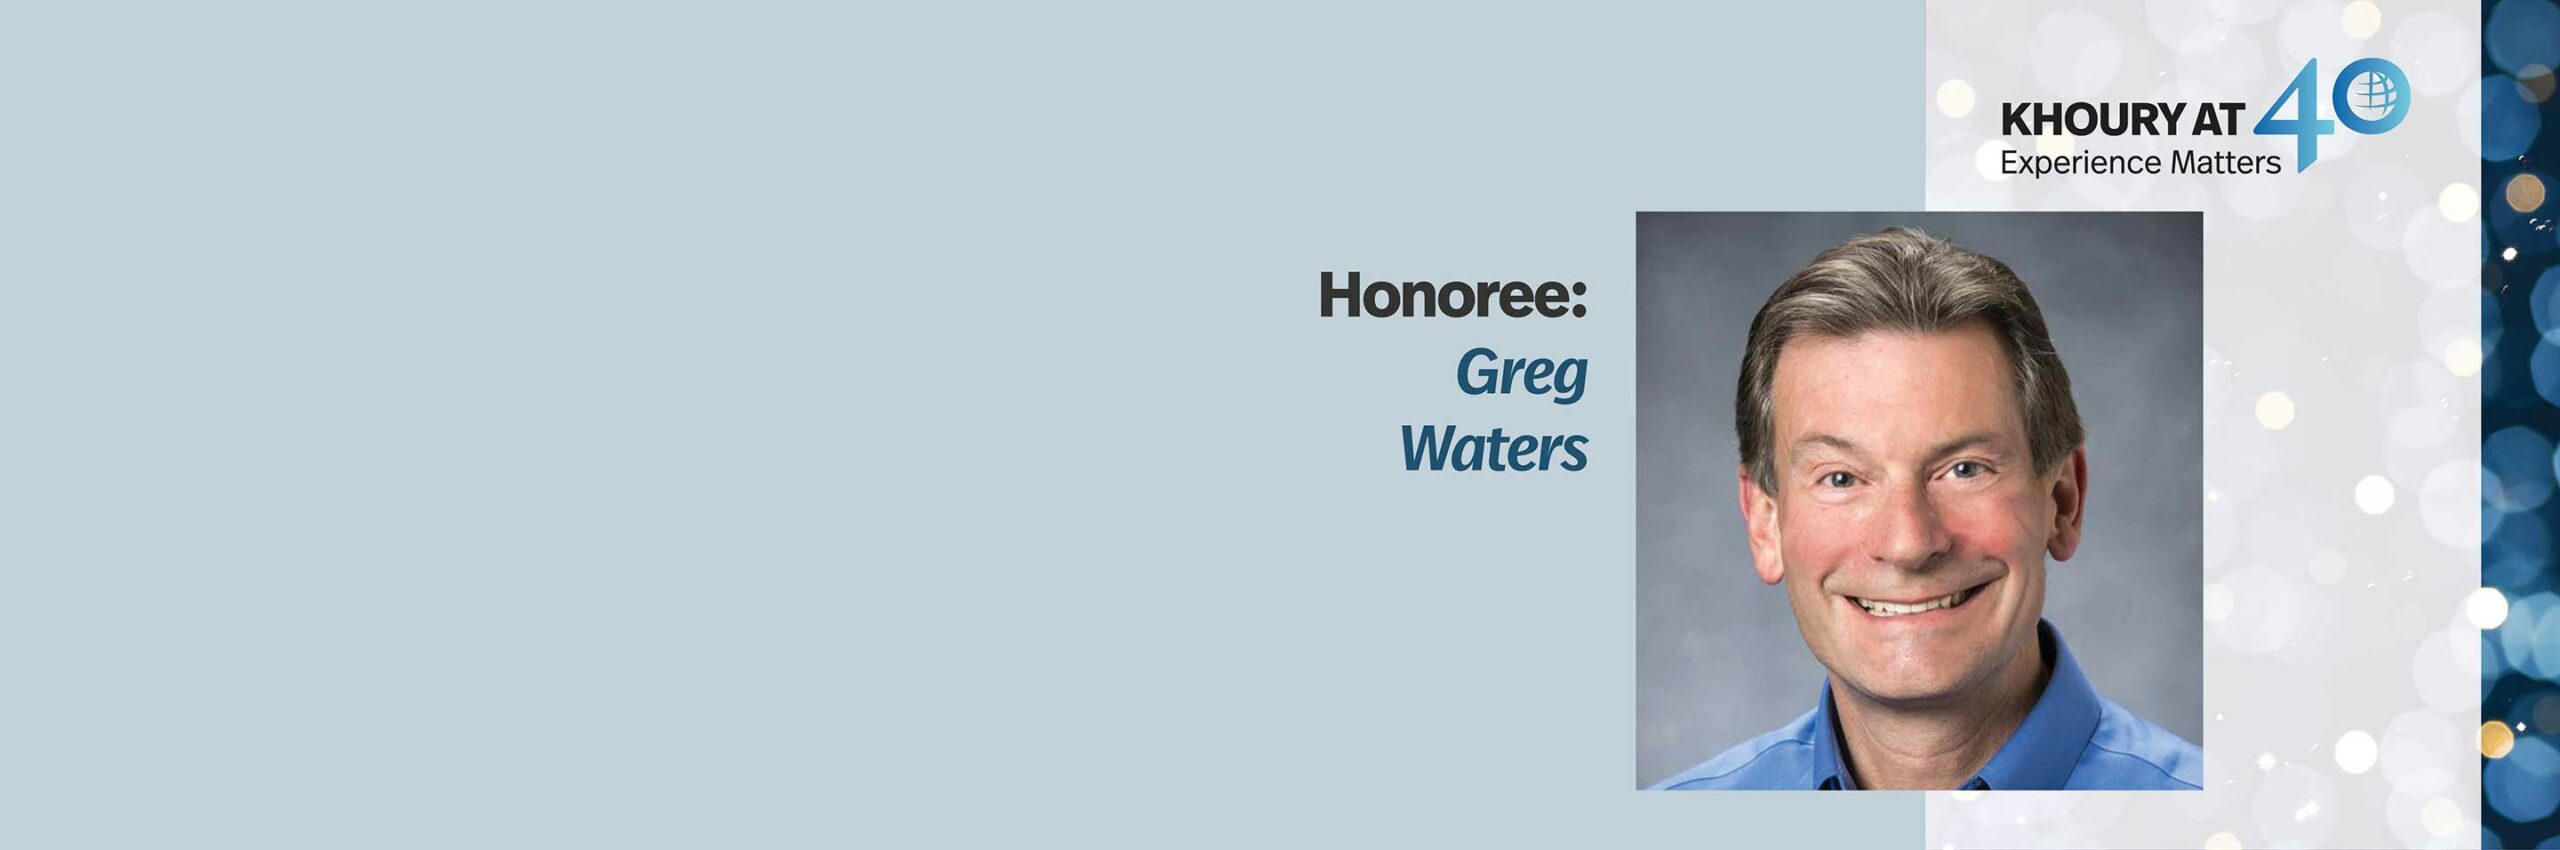 40 for 40 honoree: Greg Waters